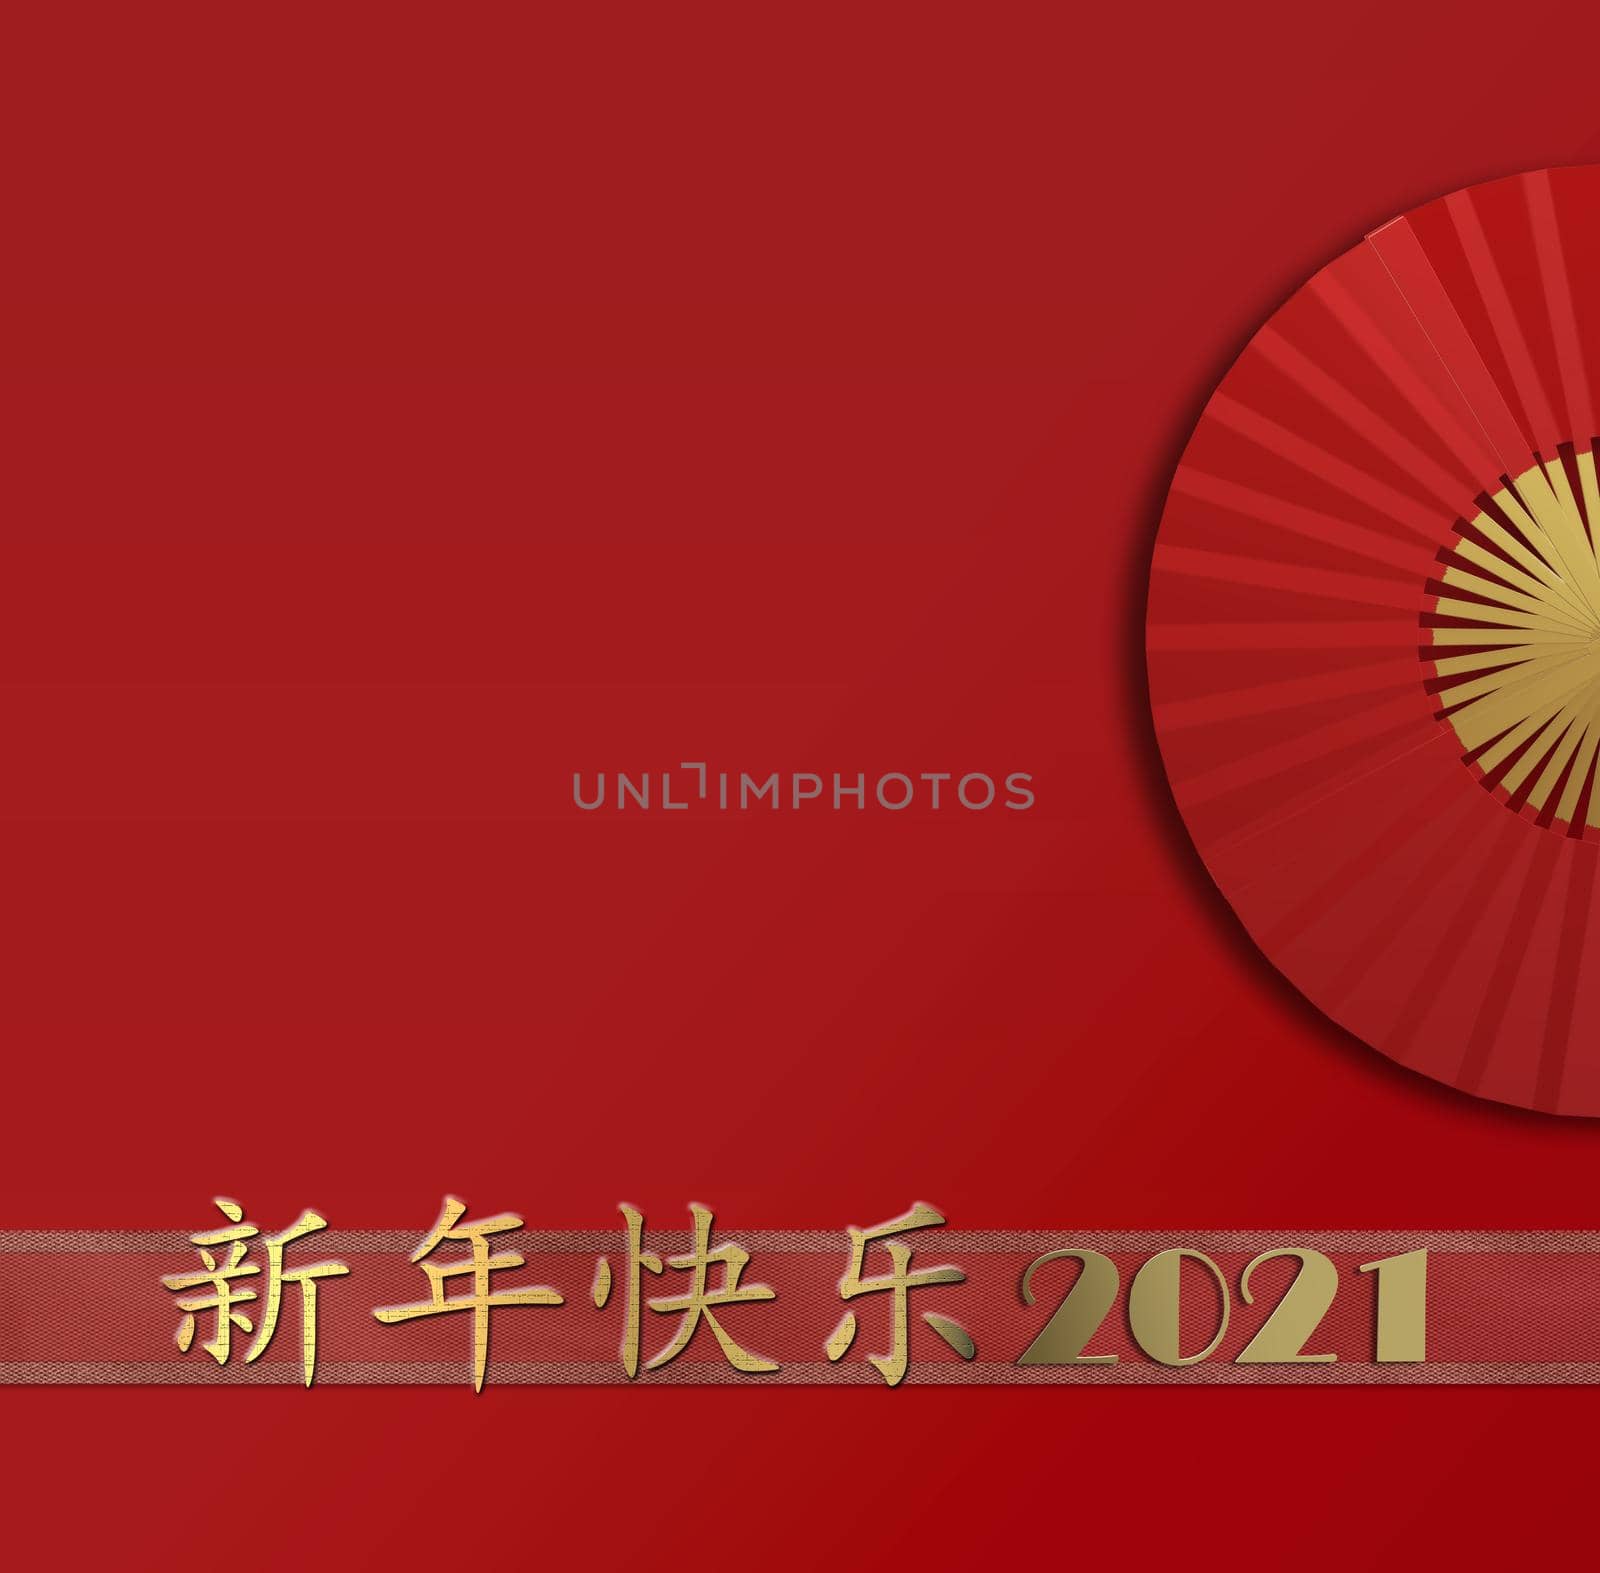 Happy New Year 2021 card. Happy Chinese new year golden text in Chinese, digit 2021, fan on red background.. Design for greetings card, invitation, posters, brochure, calendar. 3D illustration